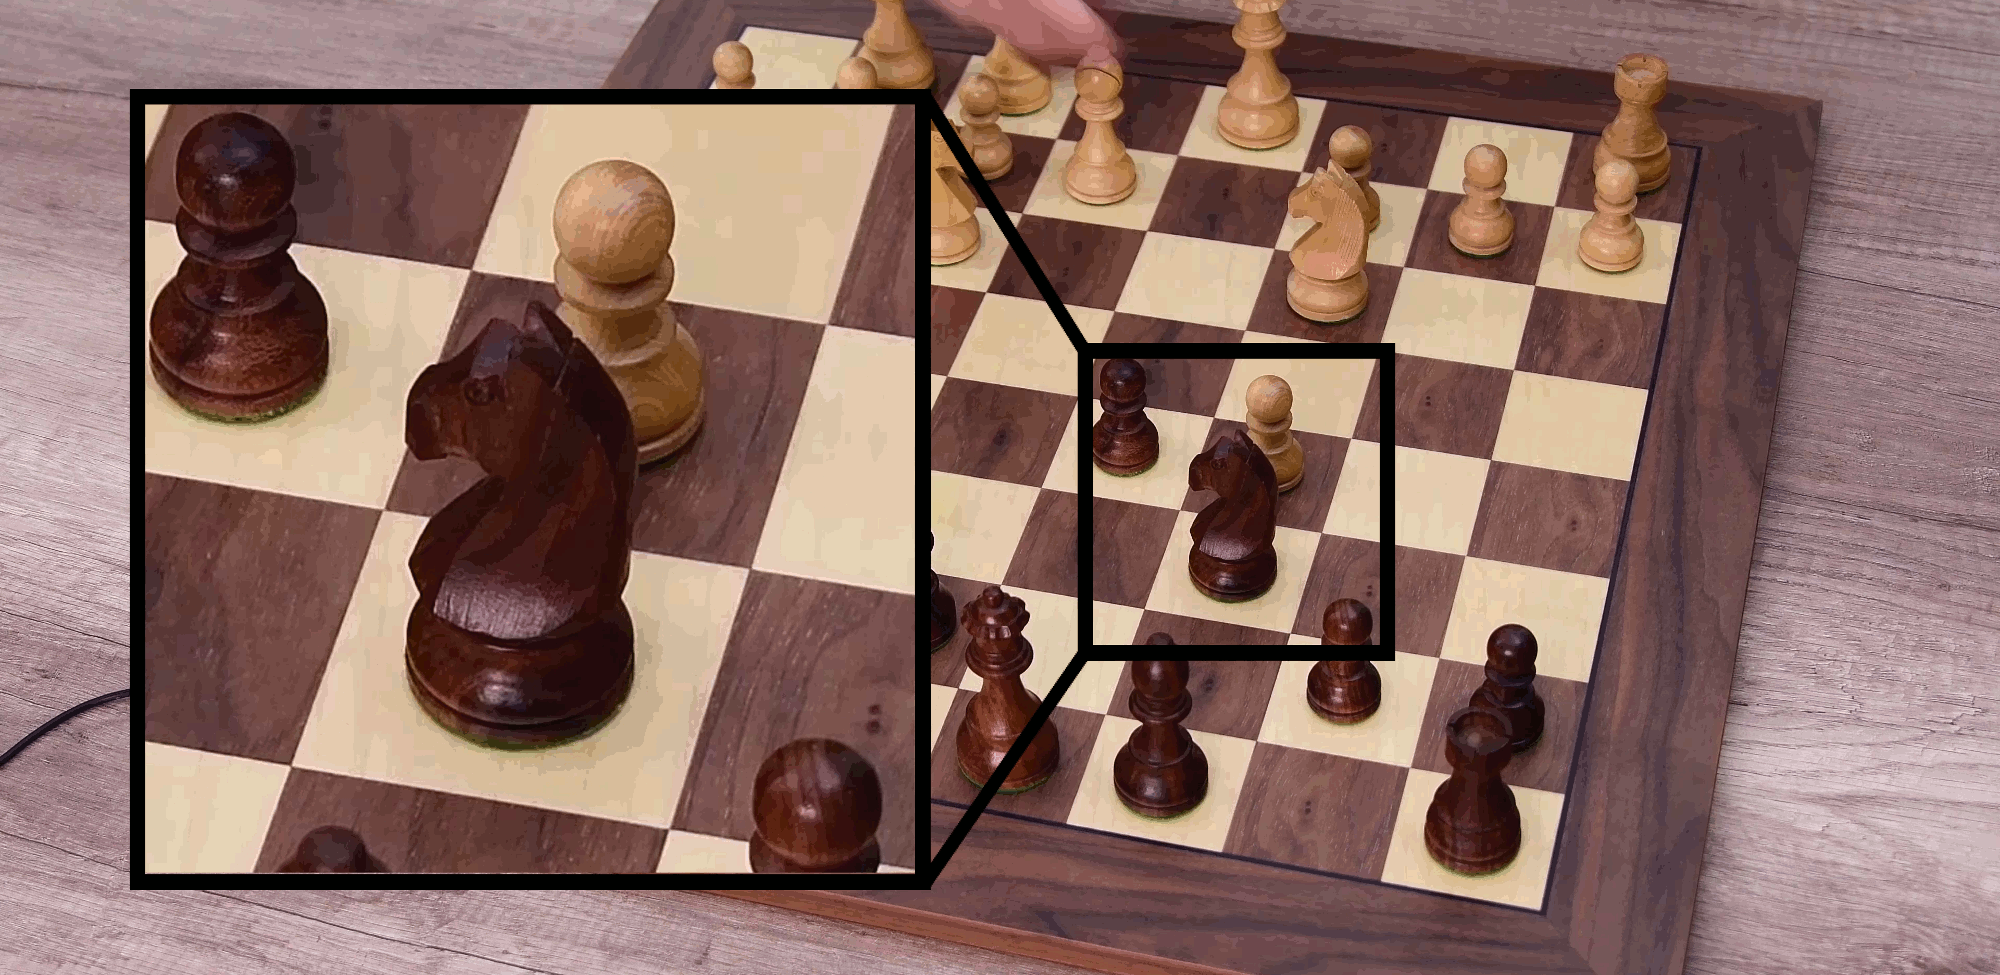 Lichess with a real board: lichess.org client for real life chess